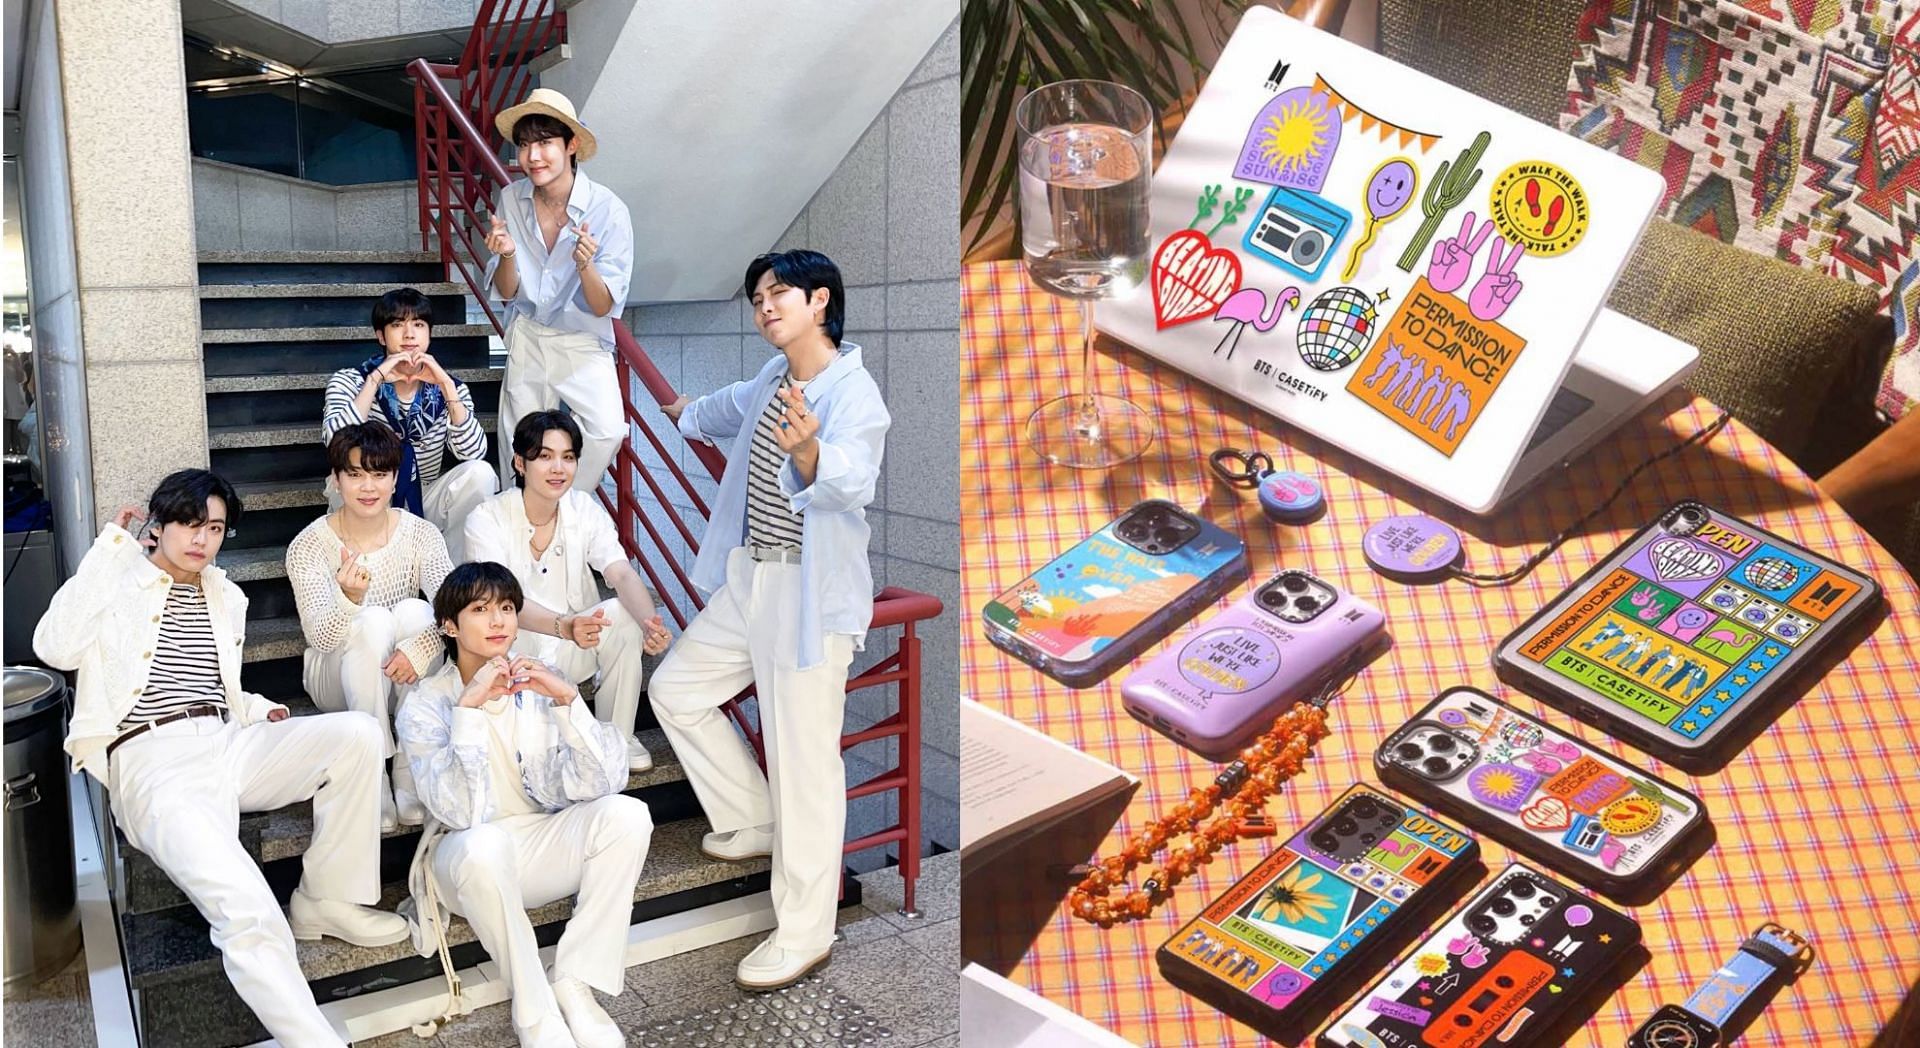 BTS collaborates with CASETiFY for their upcoming collection (Image via Twitter/@bts_bighit and Twitter/@Casetify)